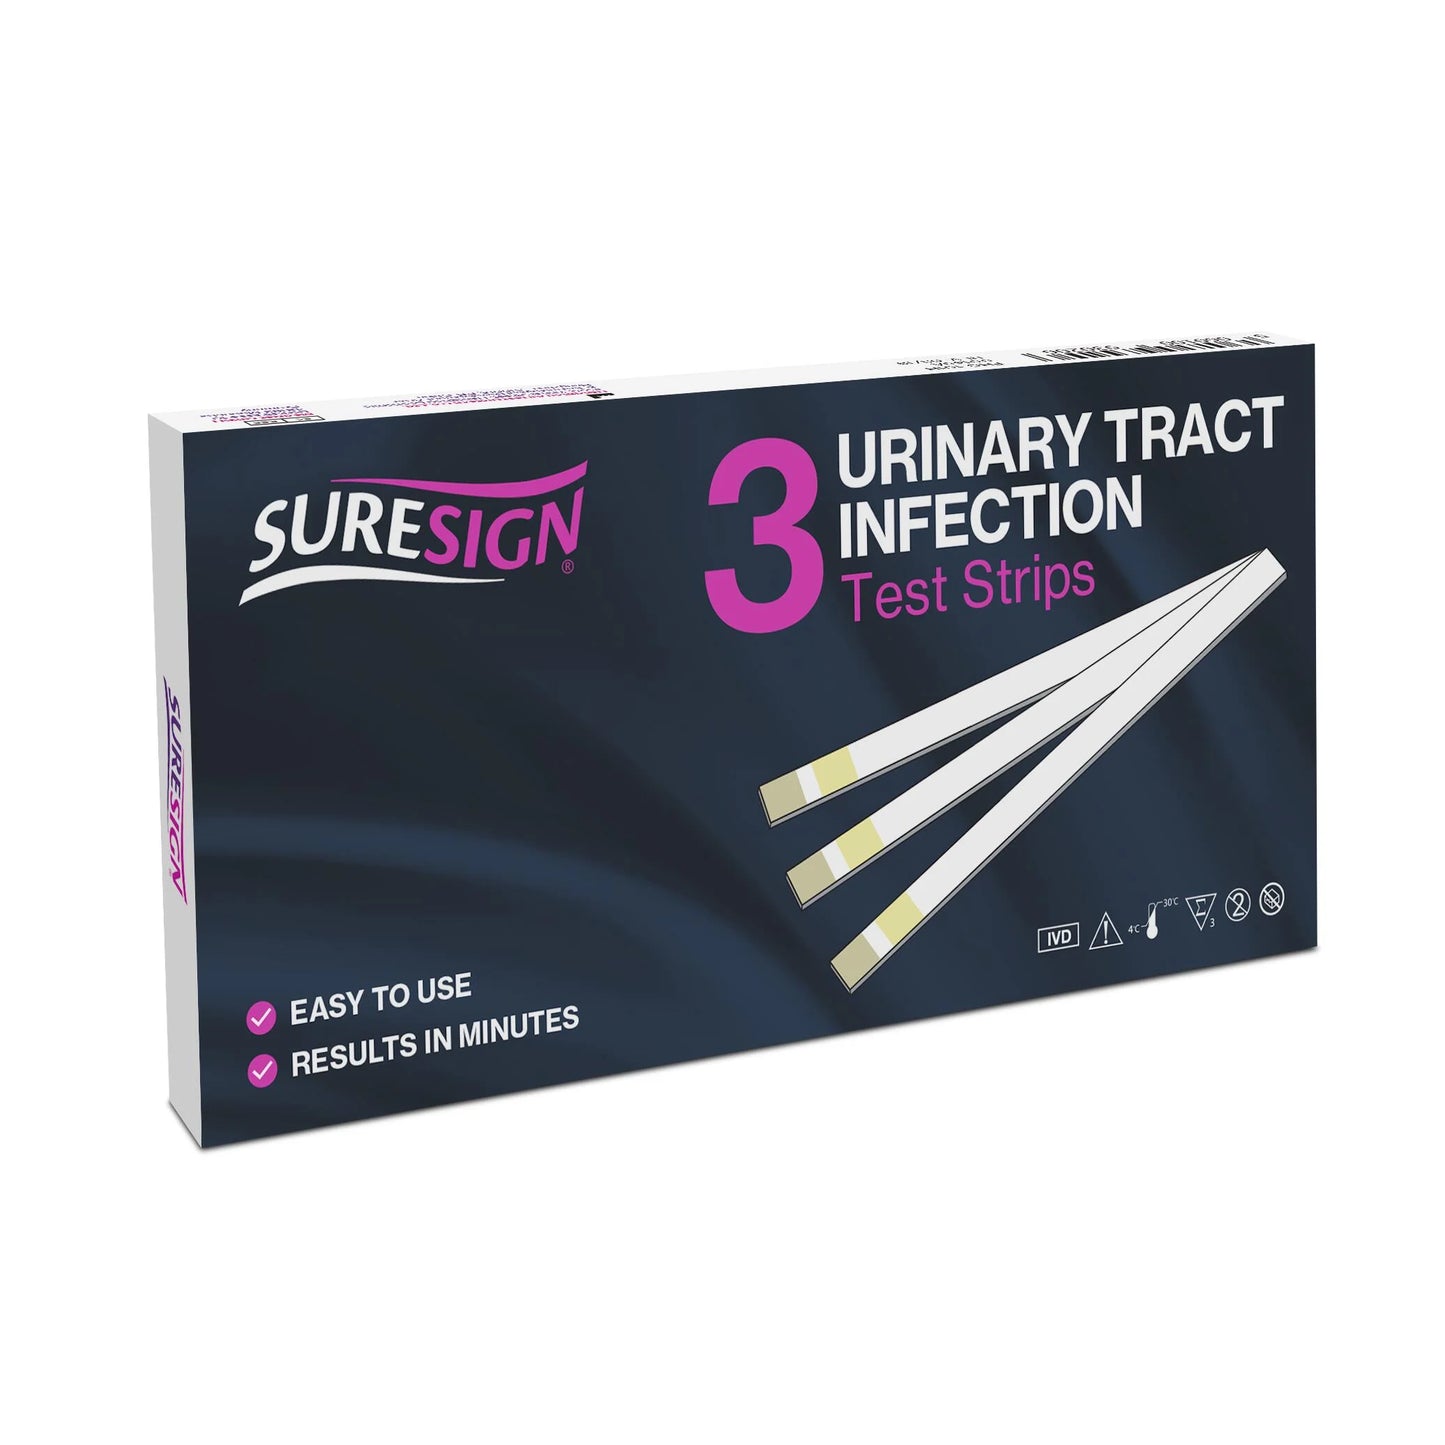 URINARY TRACT INFECTION (TEST STRIPS)